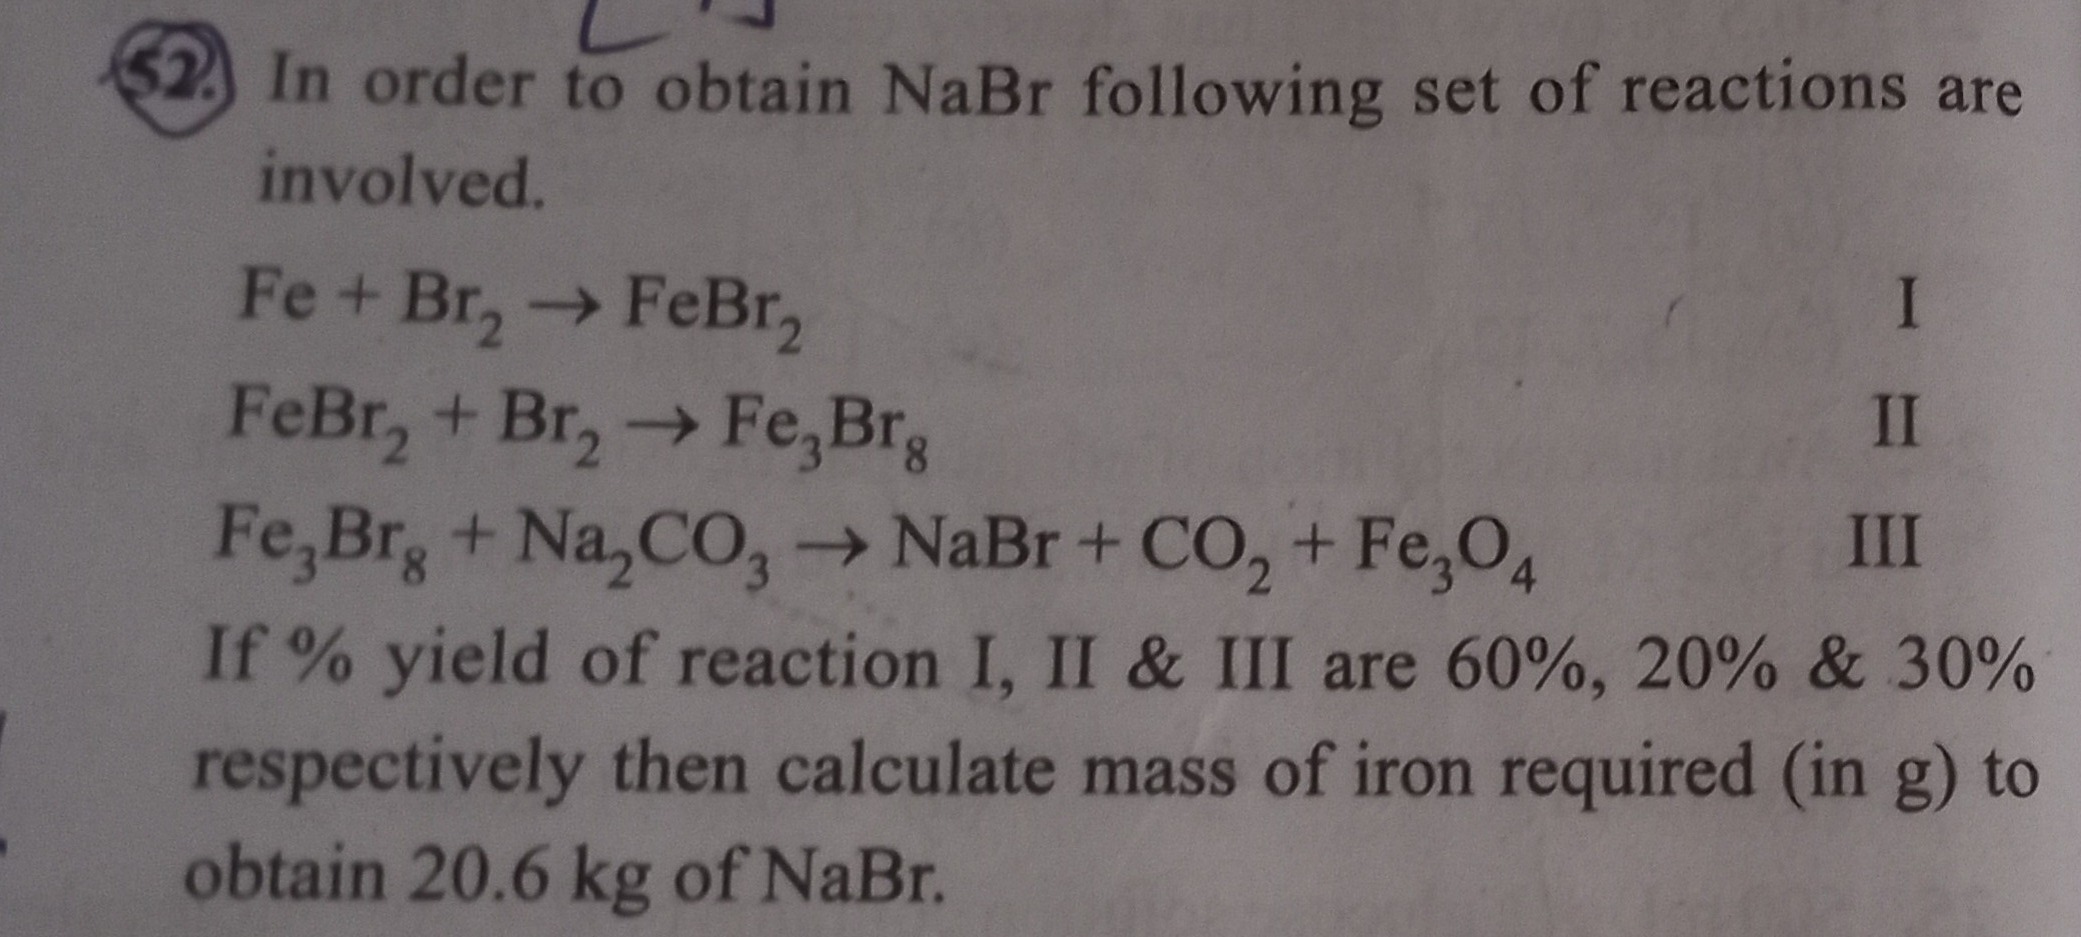 52. In order to obtain NaBr following set of reactions are involved.
F